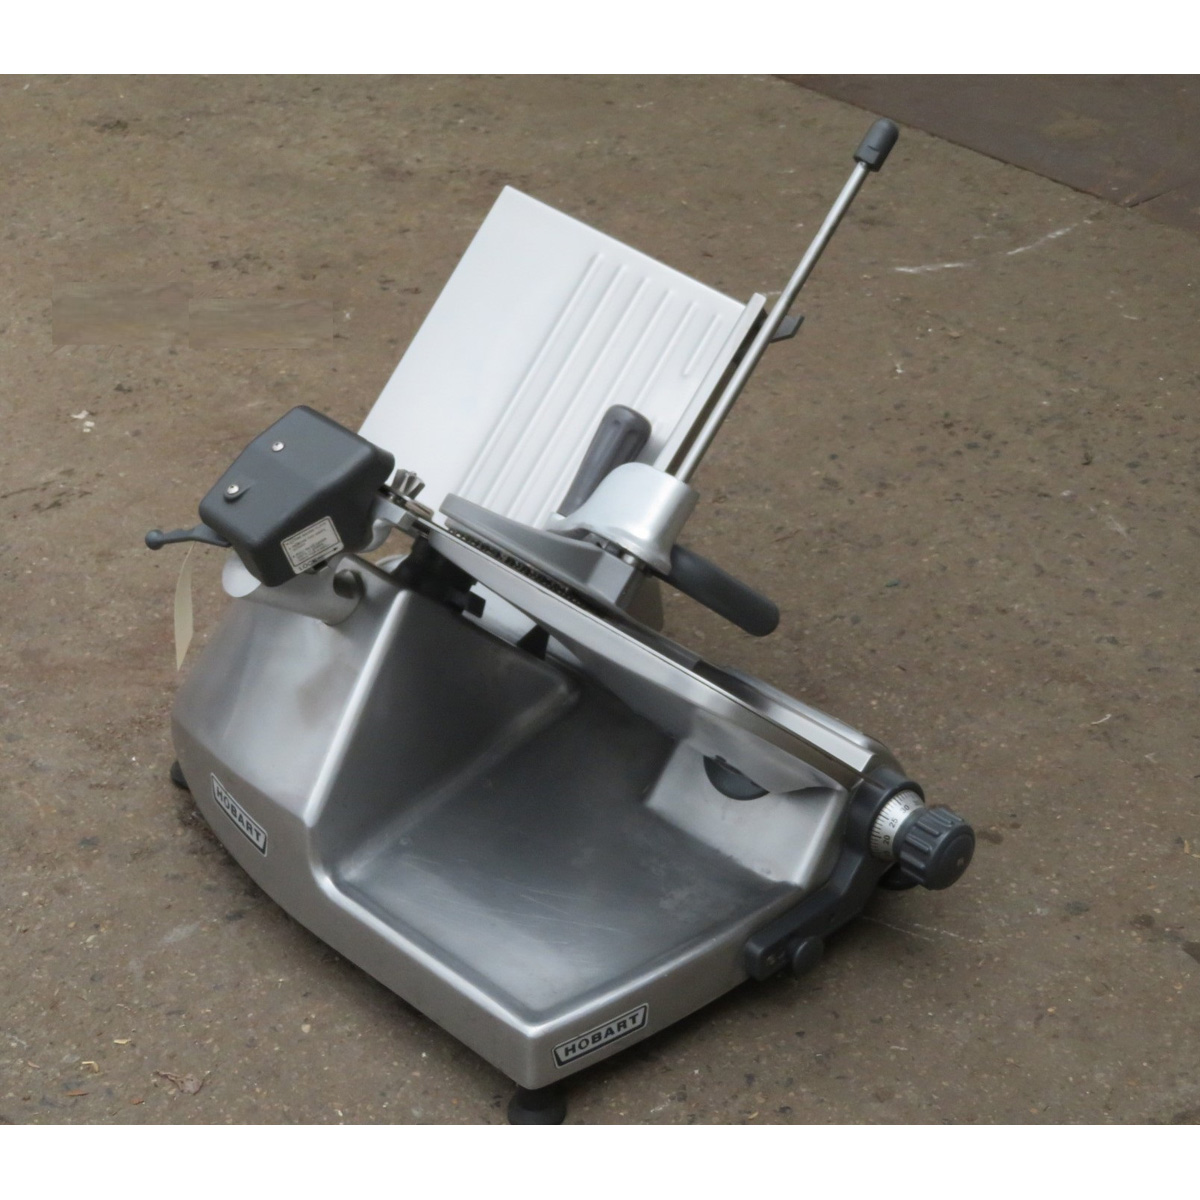 Hobart 2612 Meat Slicer, Used Great Condition